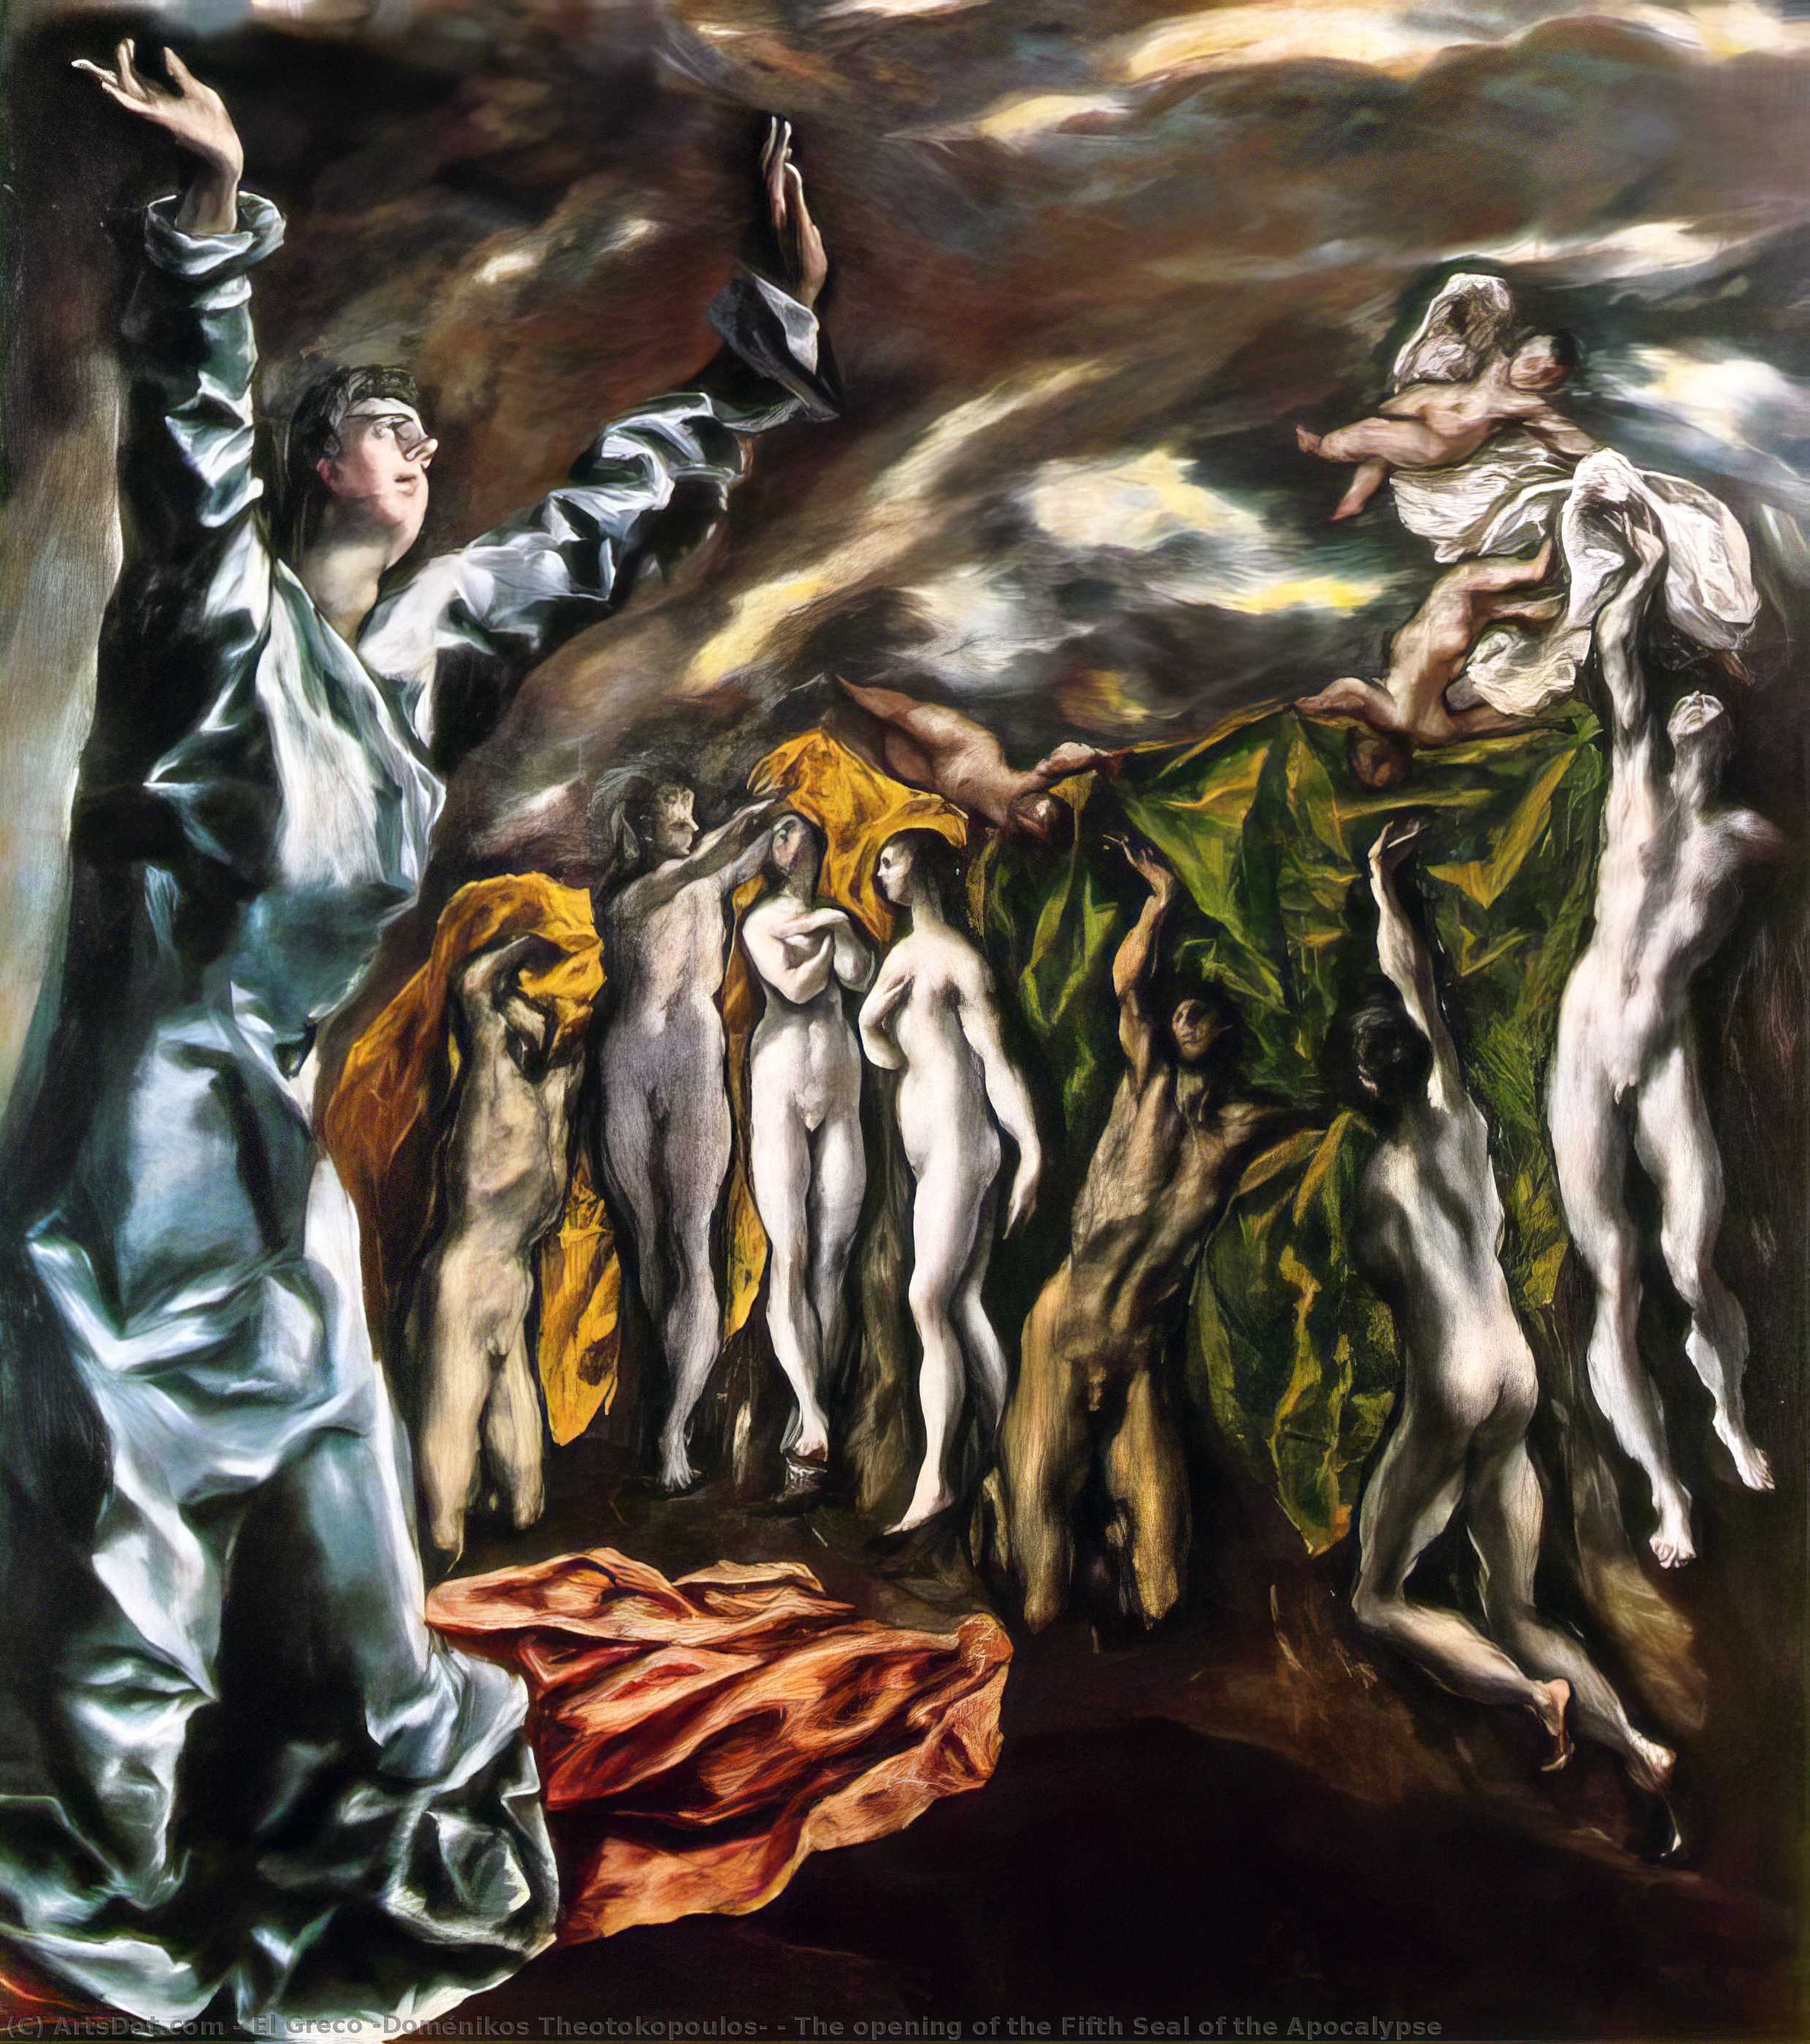 WikiOO.org - Encyclopedia of Fine Arts - Lukisan, Artwork El Greco (Doménikos Theotokopoulos) - The opening of the Fifth Seal of the Apocalypse